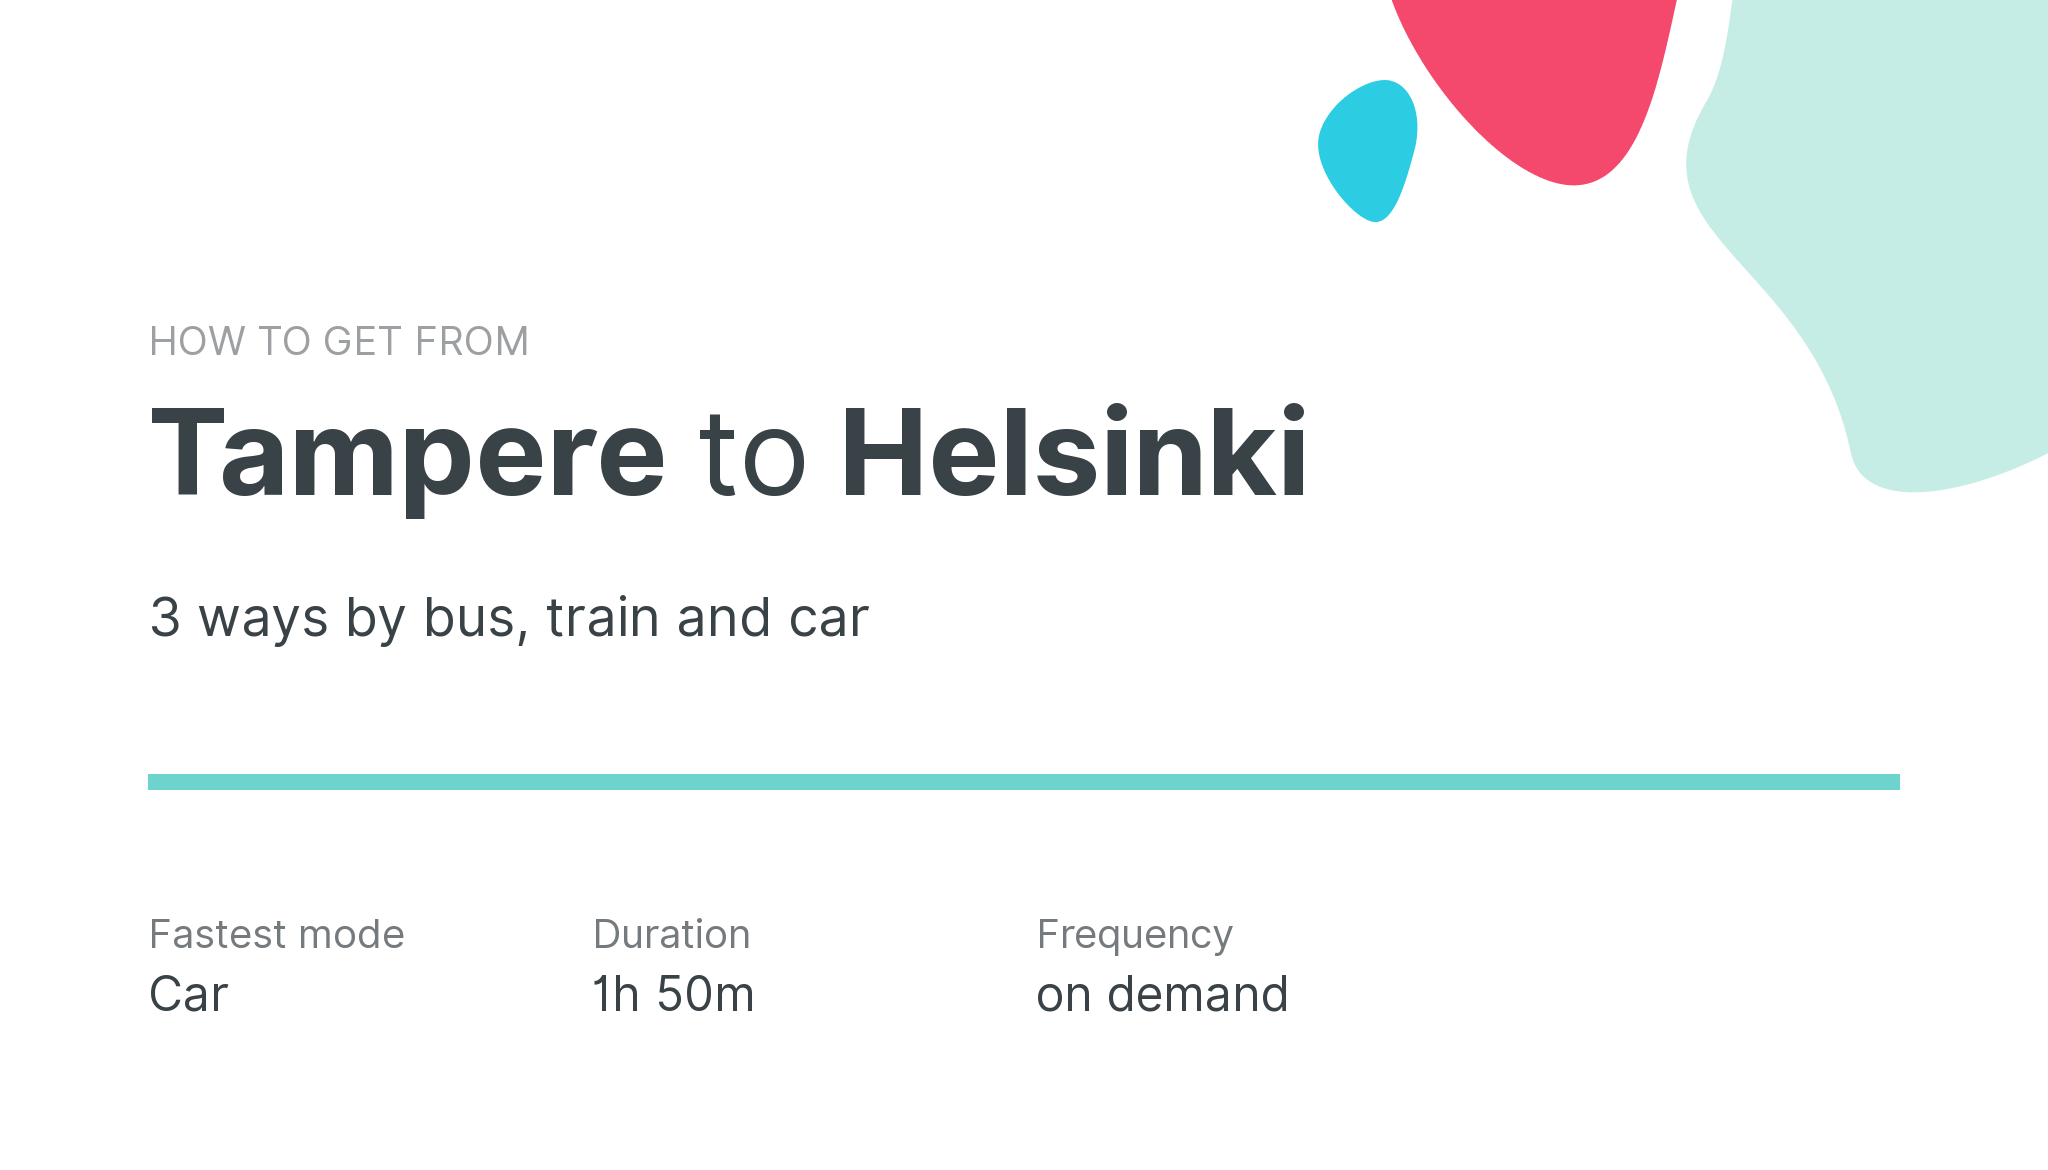 How do I get from Tampere to Helsinki